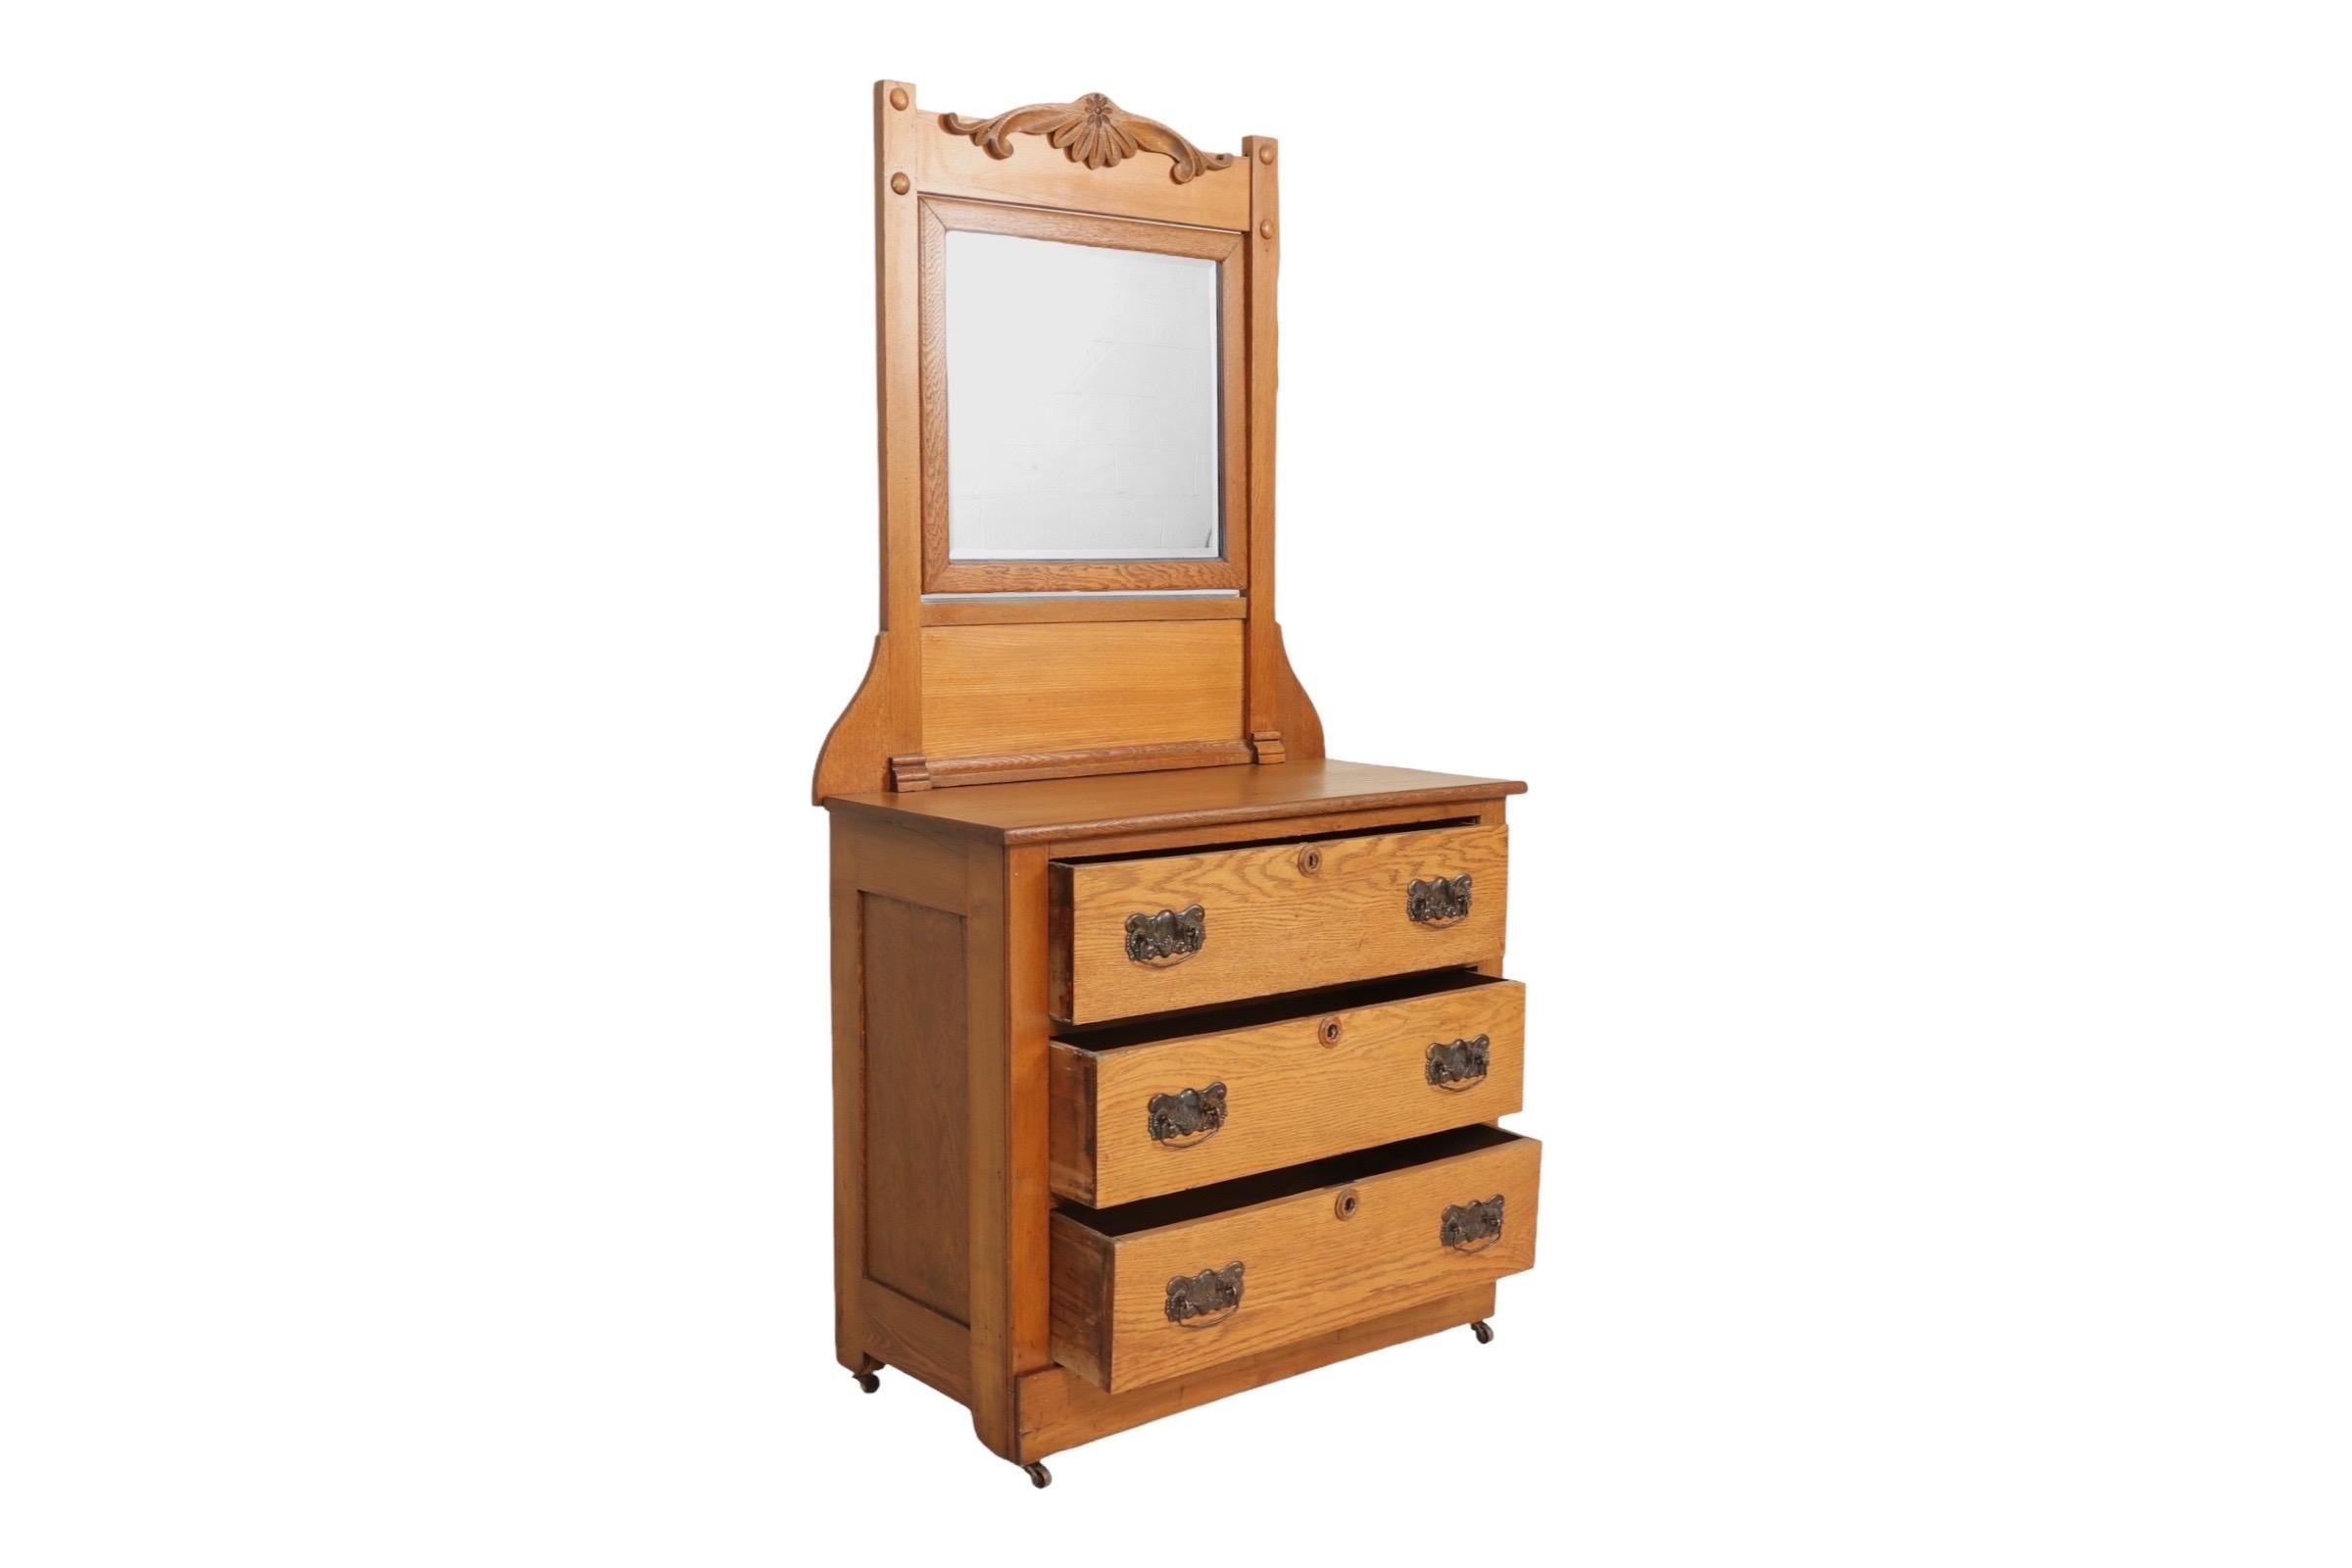 A three drawer dresser made of oak with a vanity mirror dating from the early 20th century. The square beveled mirror is adjustable, topped with a simple carved appliqué. Three slot dovetailed drawers below, open with rudimentary metal bail handles